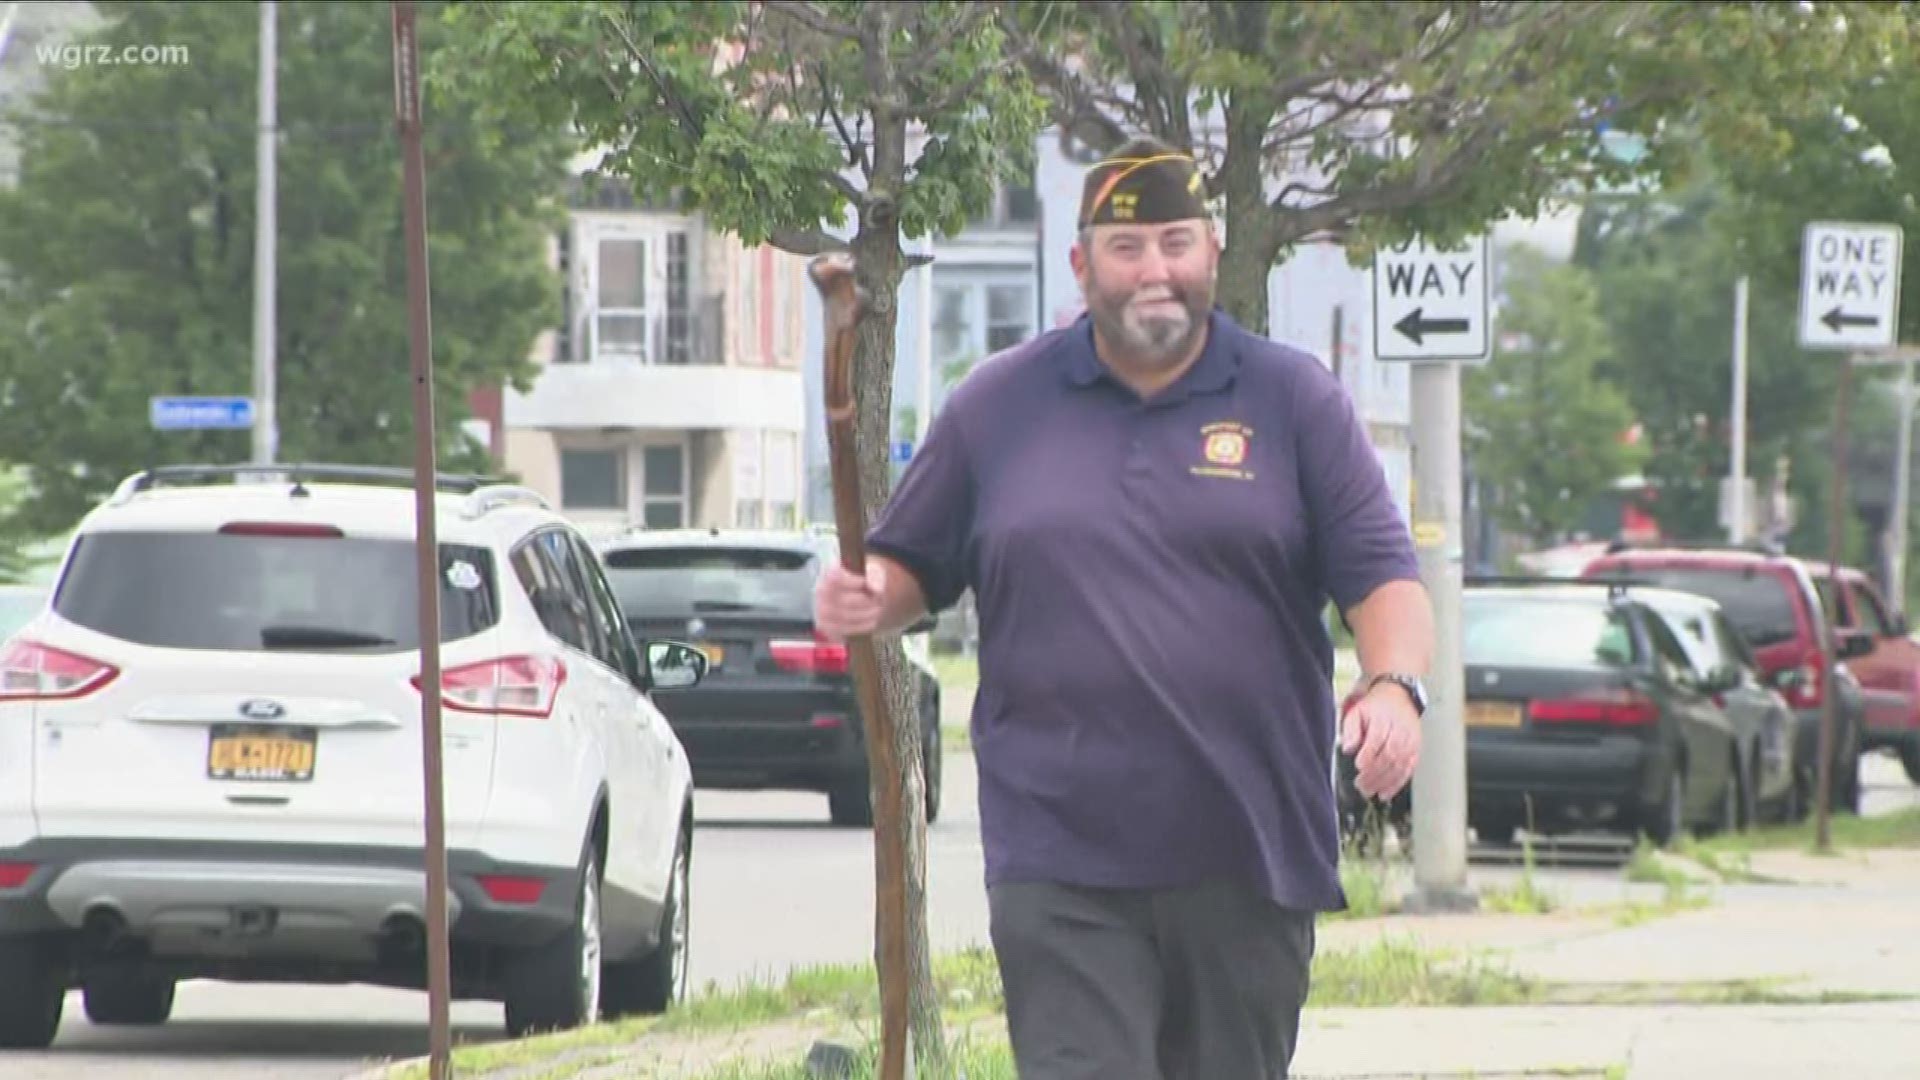 Navy vet Tommy Zurhellen is walking 22 miles a day.
That's how many veterans the V-A says take their own lives each day.